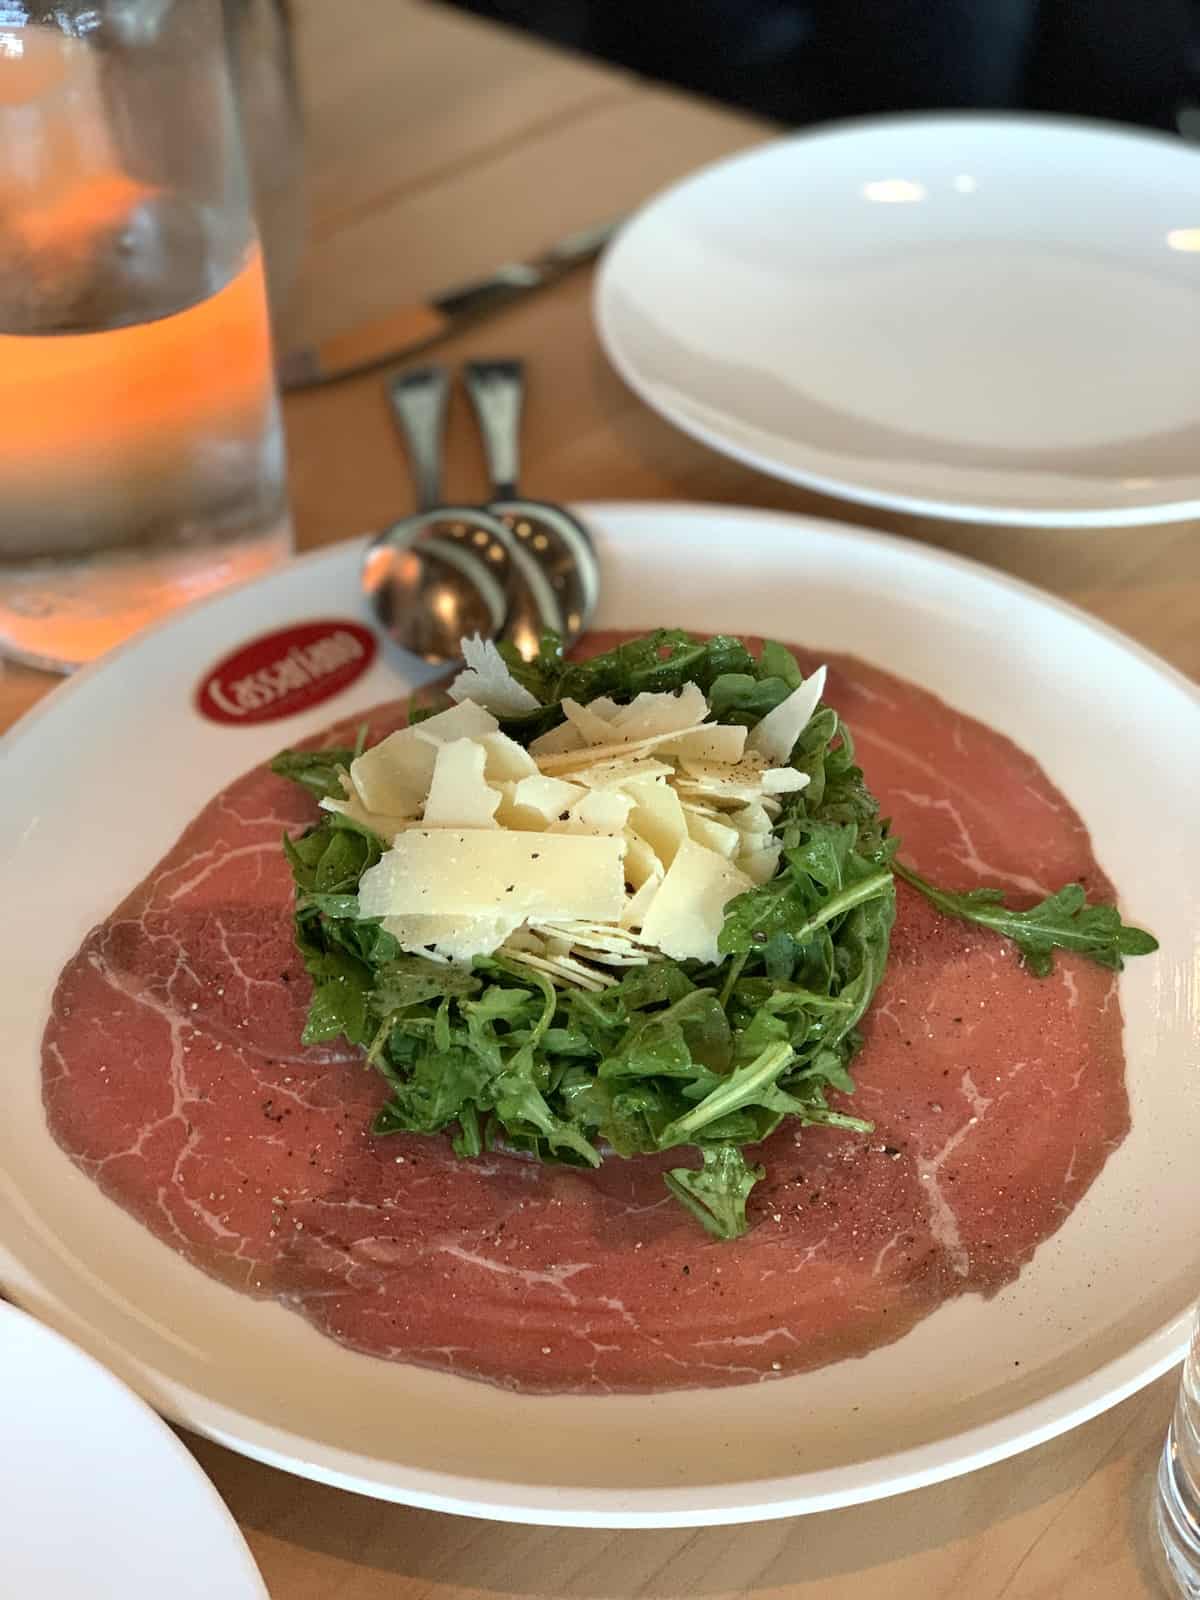 Carpaccio di Carne with parmesan cheese and Cassariano restaurant.